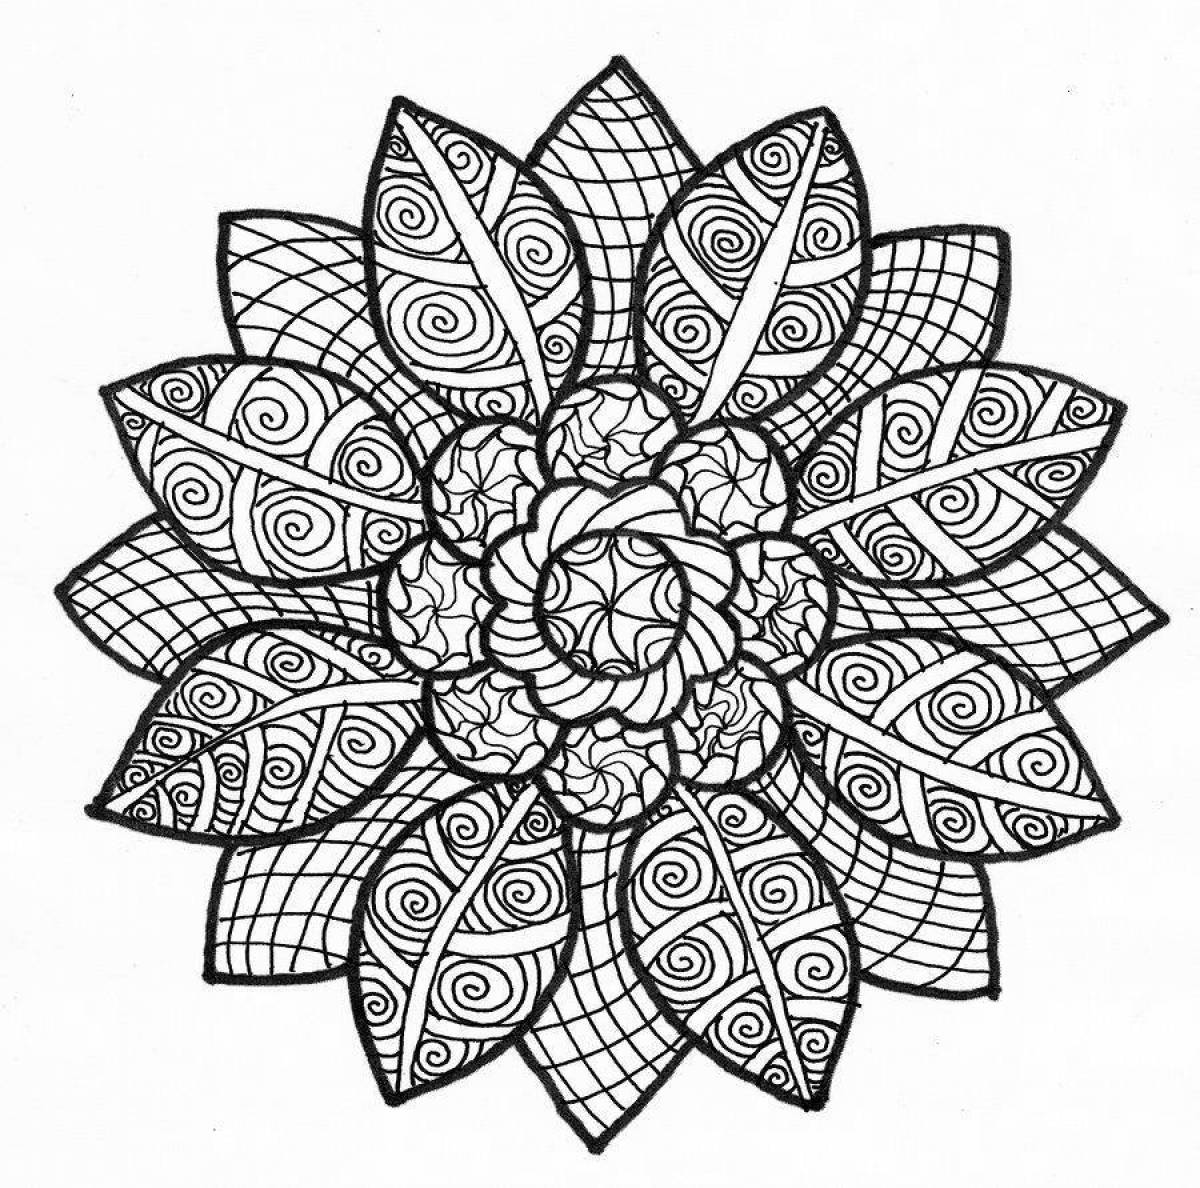 Color-bright coloring page for black gel pen